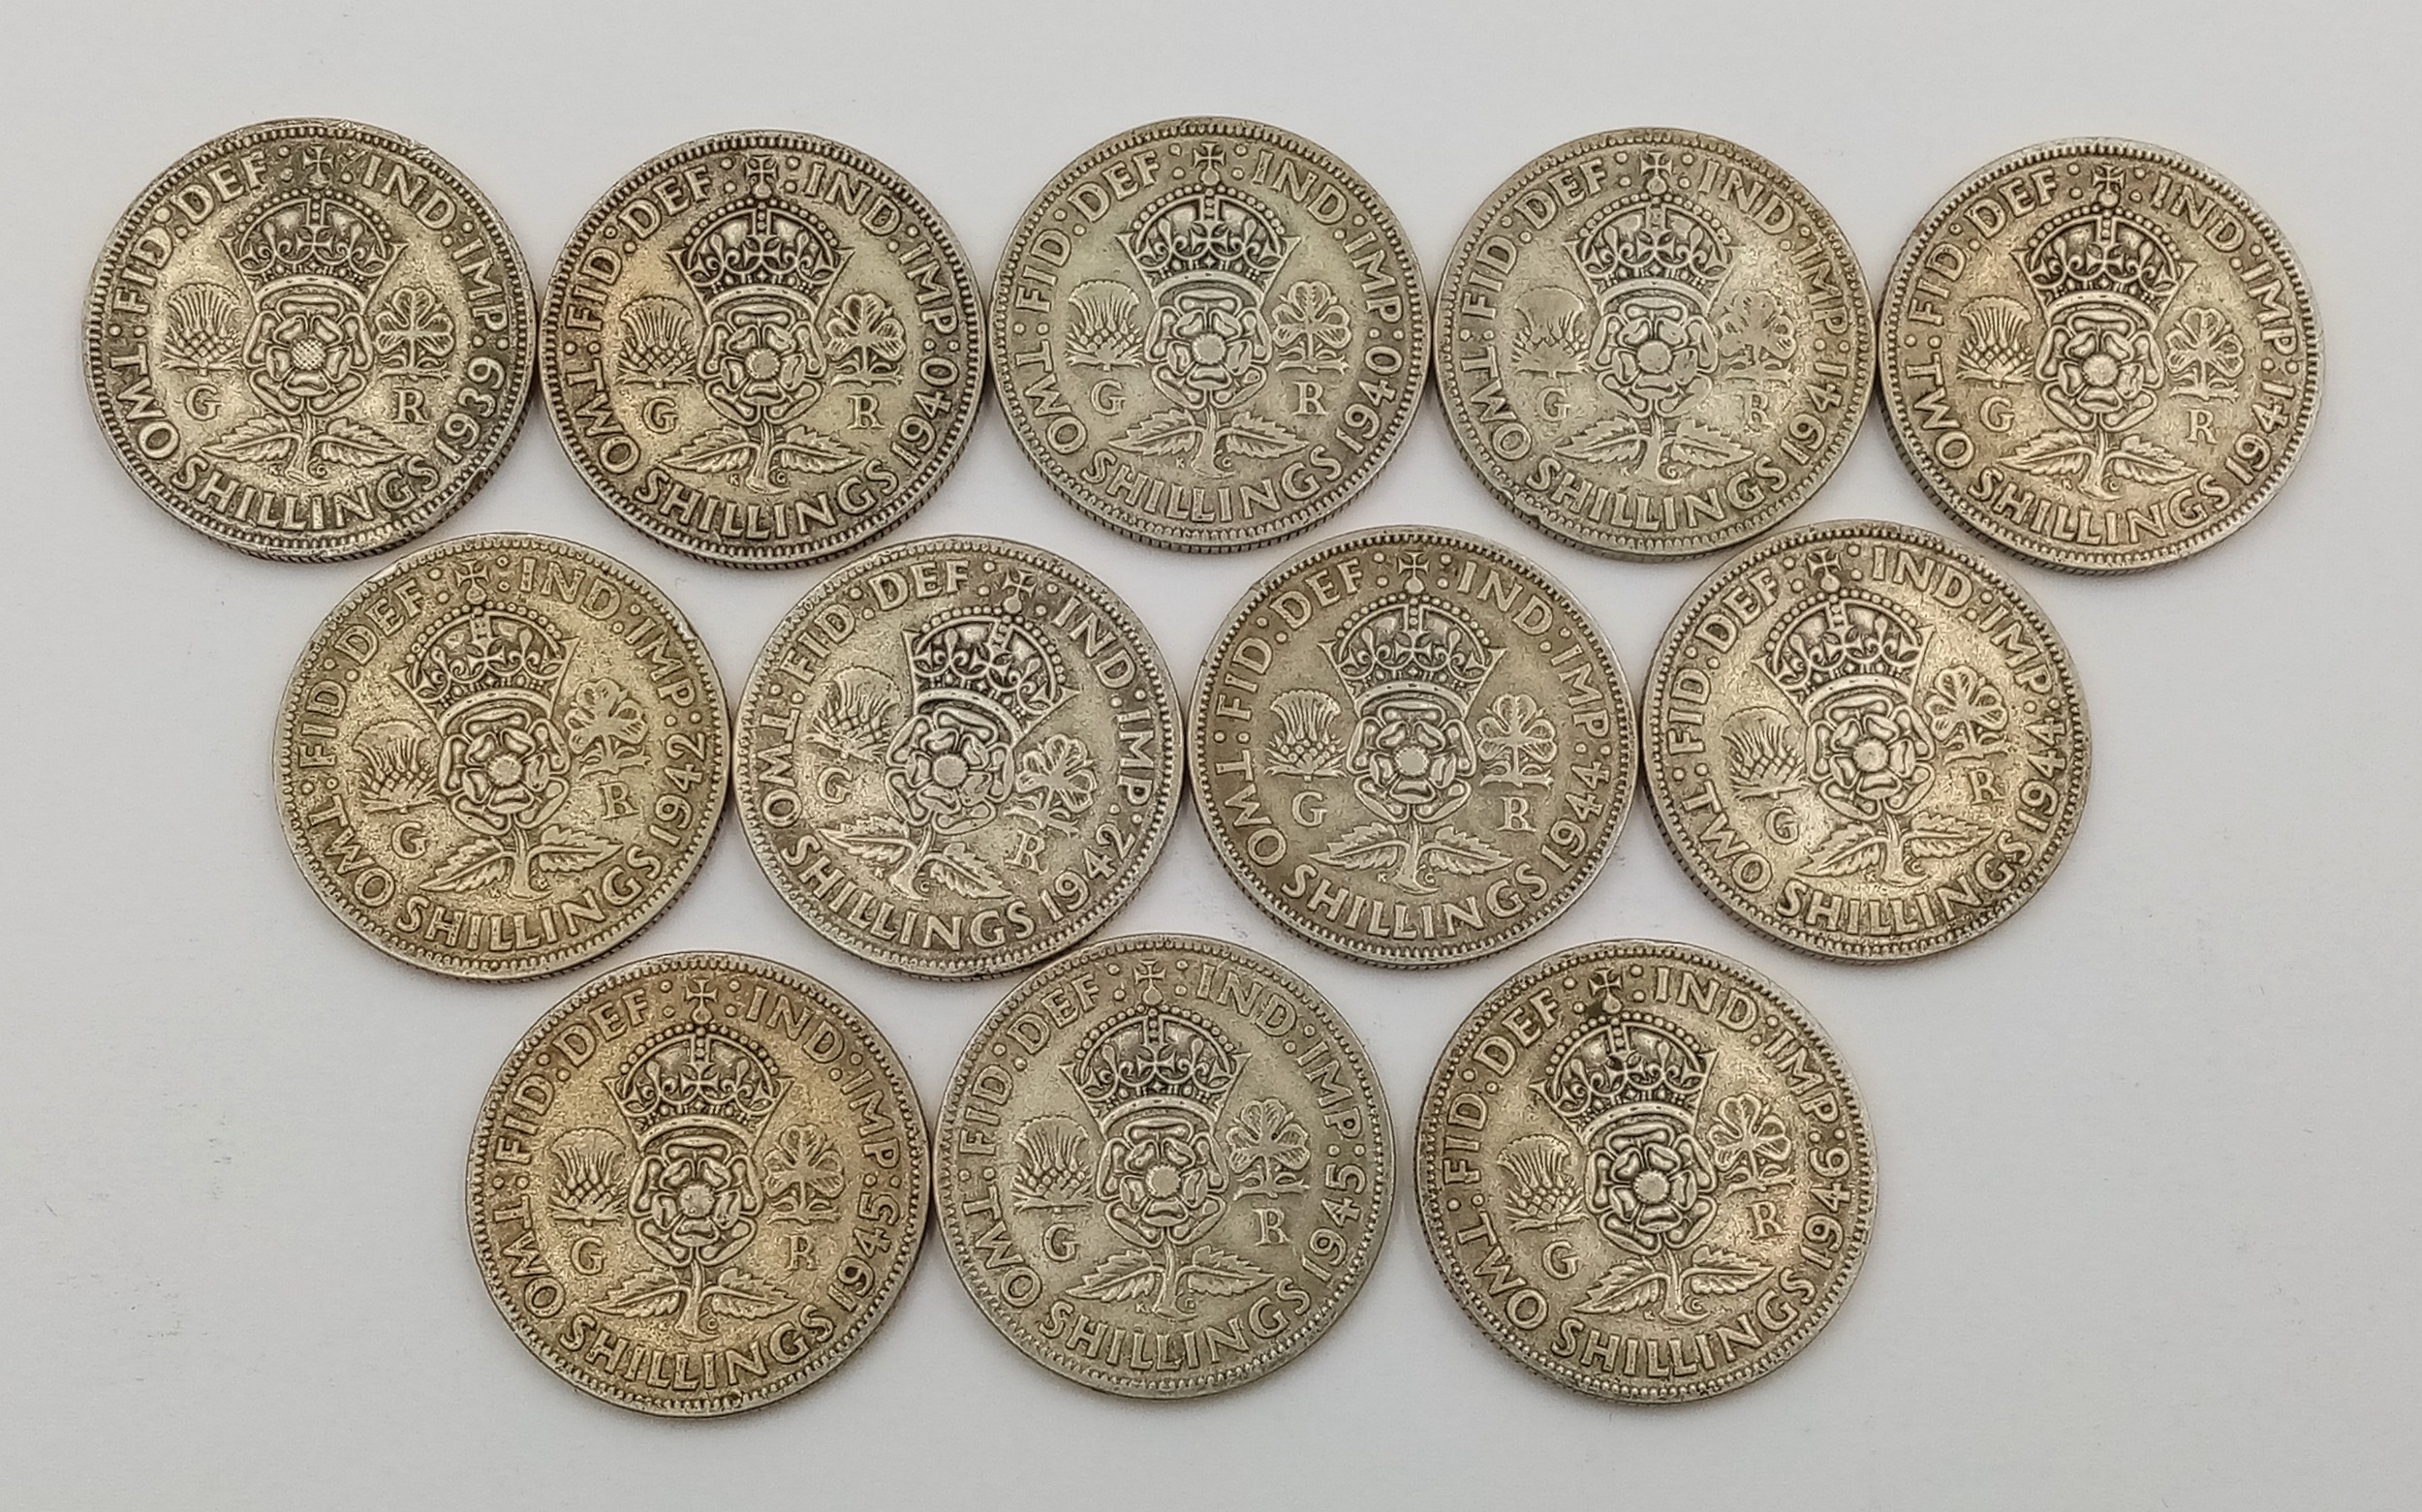 A Parcel of Twelve Pre-1947 Silver Two Shilling (Florin) Coins. Dates: 1 x 1939, 2 x 1940, 2 x 1941, - Image 2 of 2